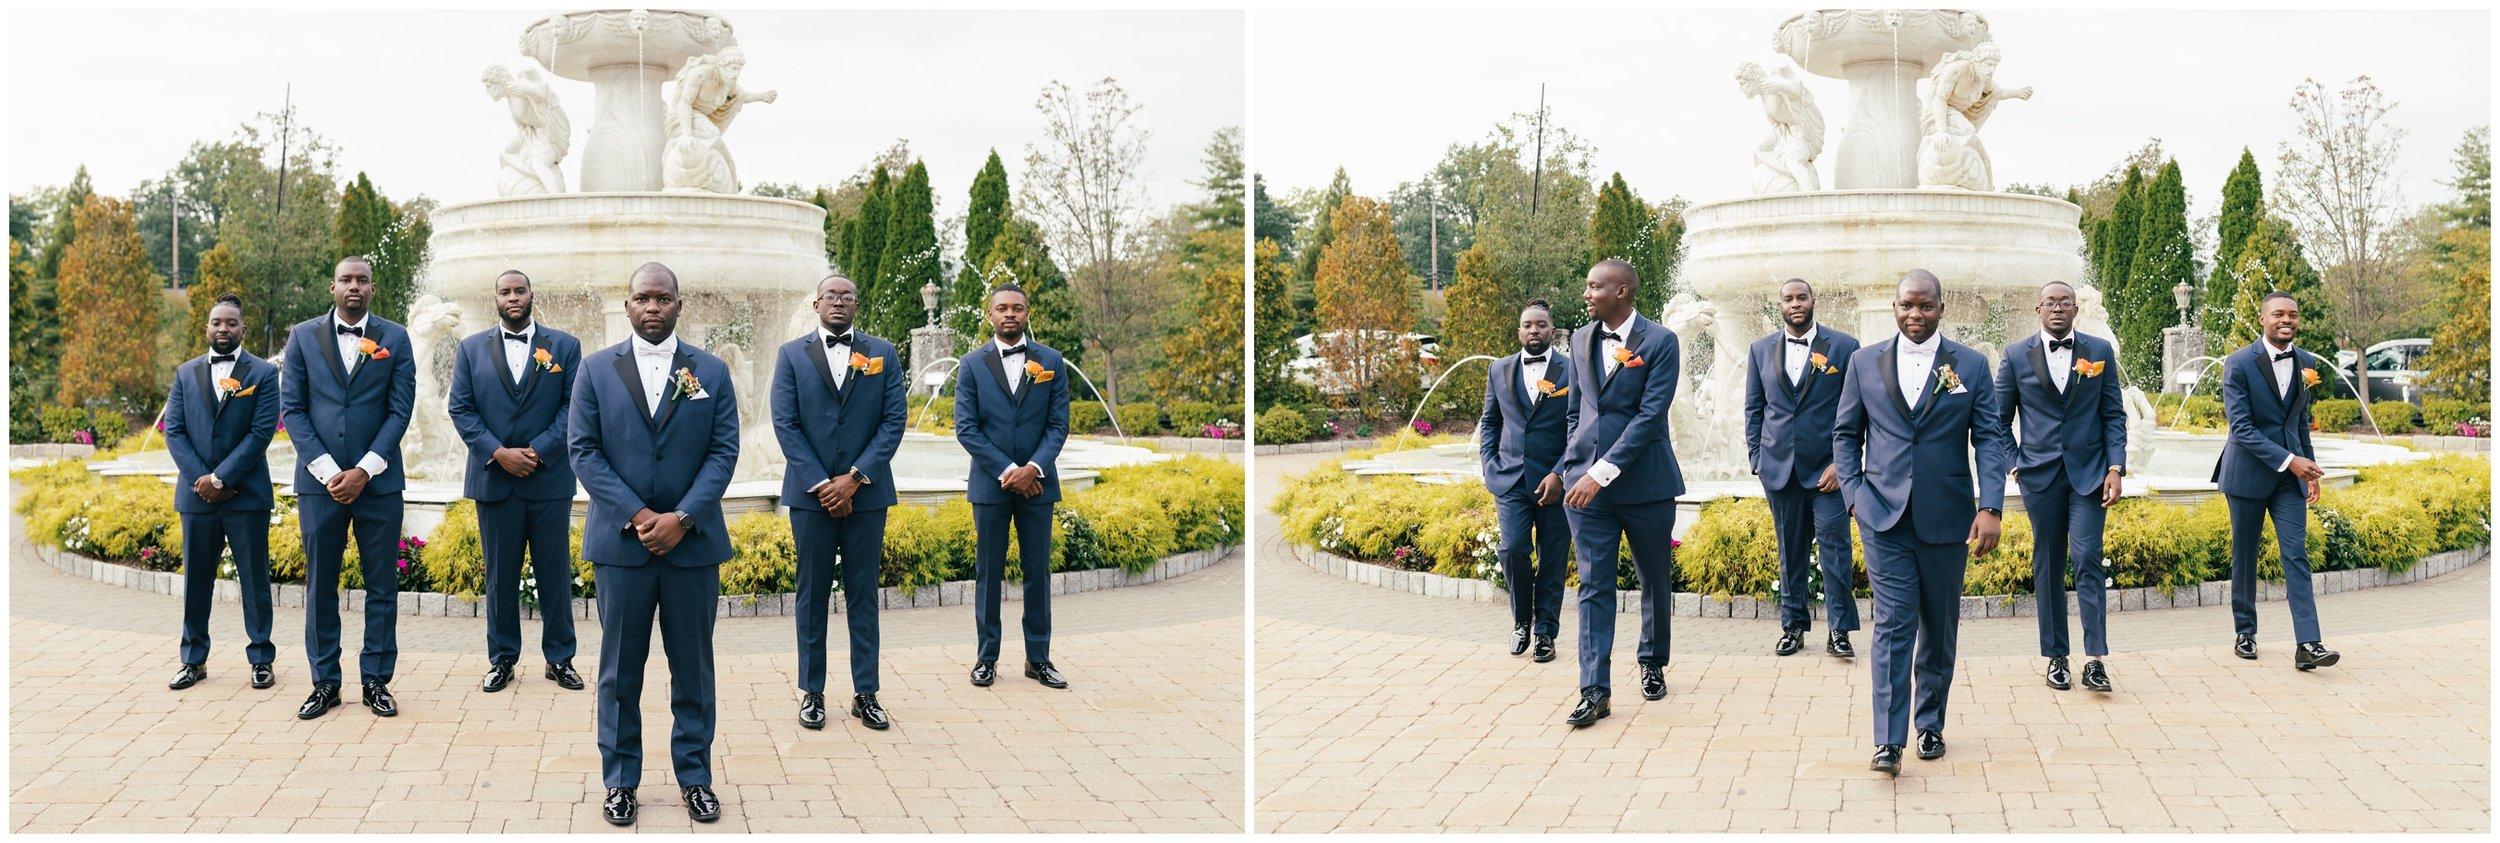 Groomsmen photos in front of a grand fountain